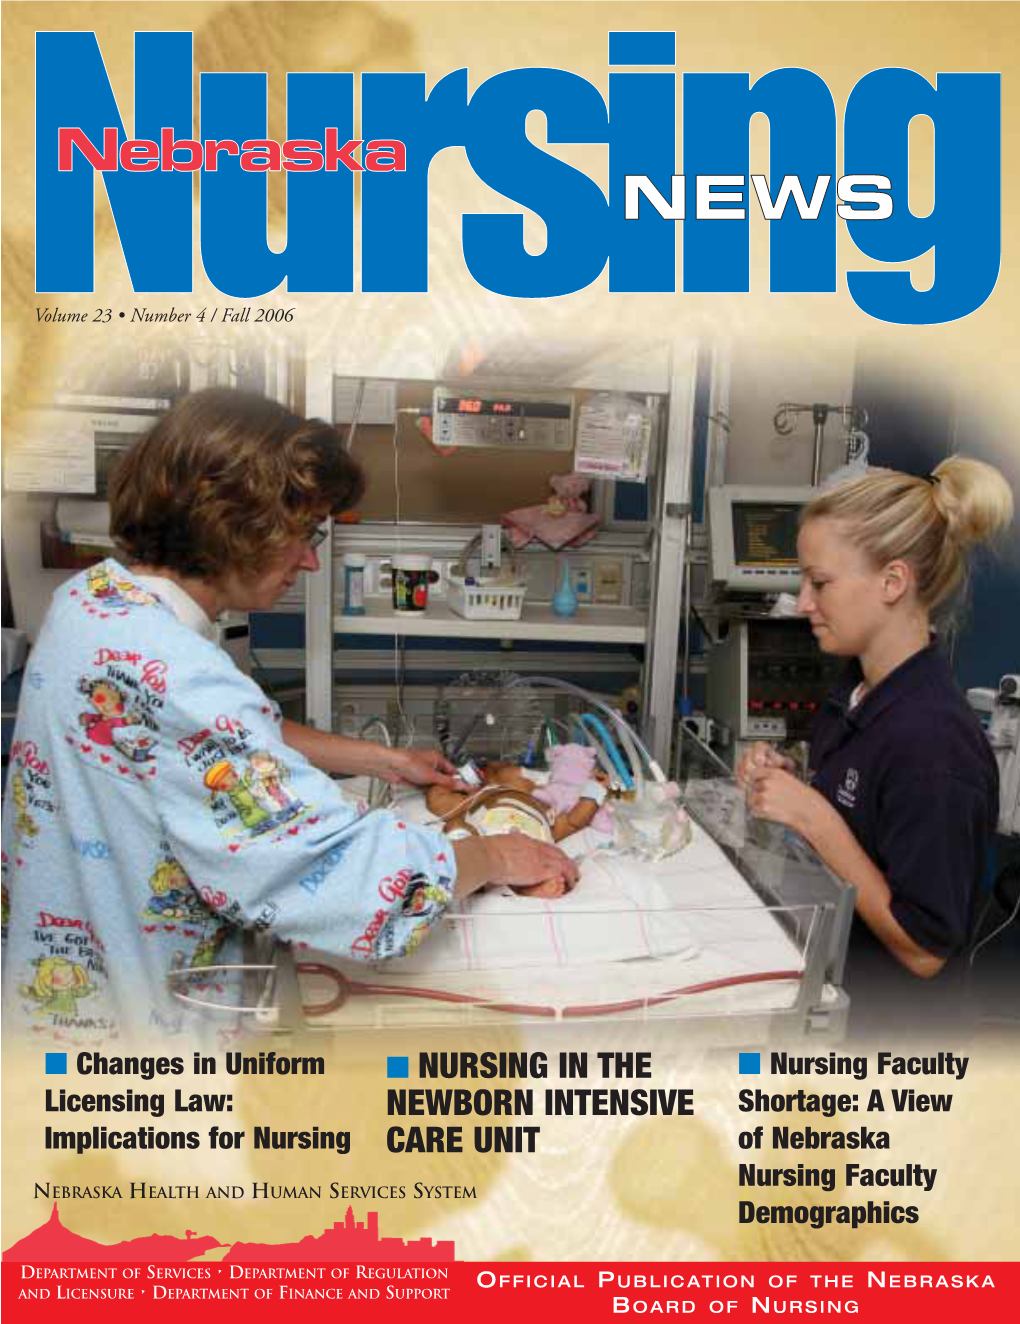 Nursing in the Newborn Intensive Care Unit: a CHALLENGING and REWARDING CAREER